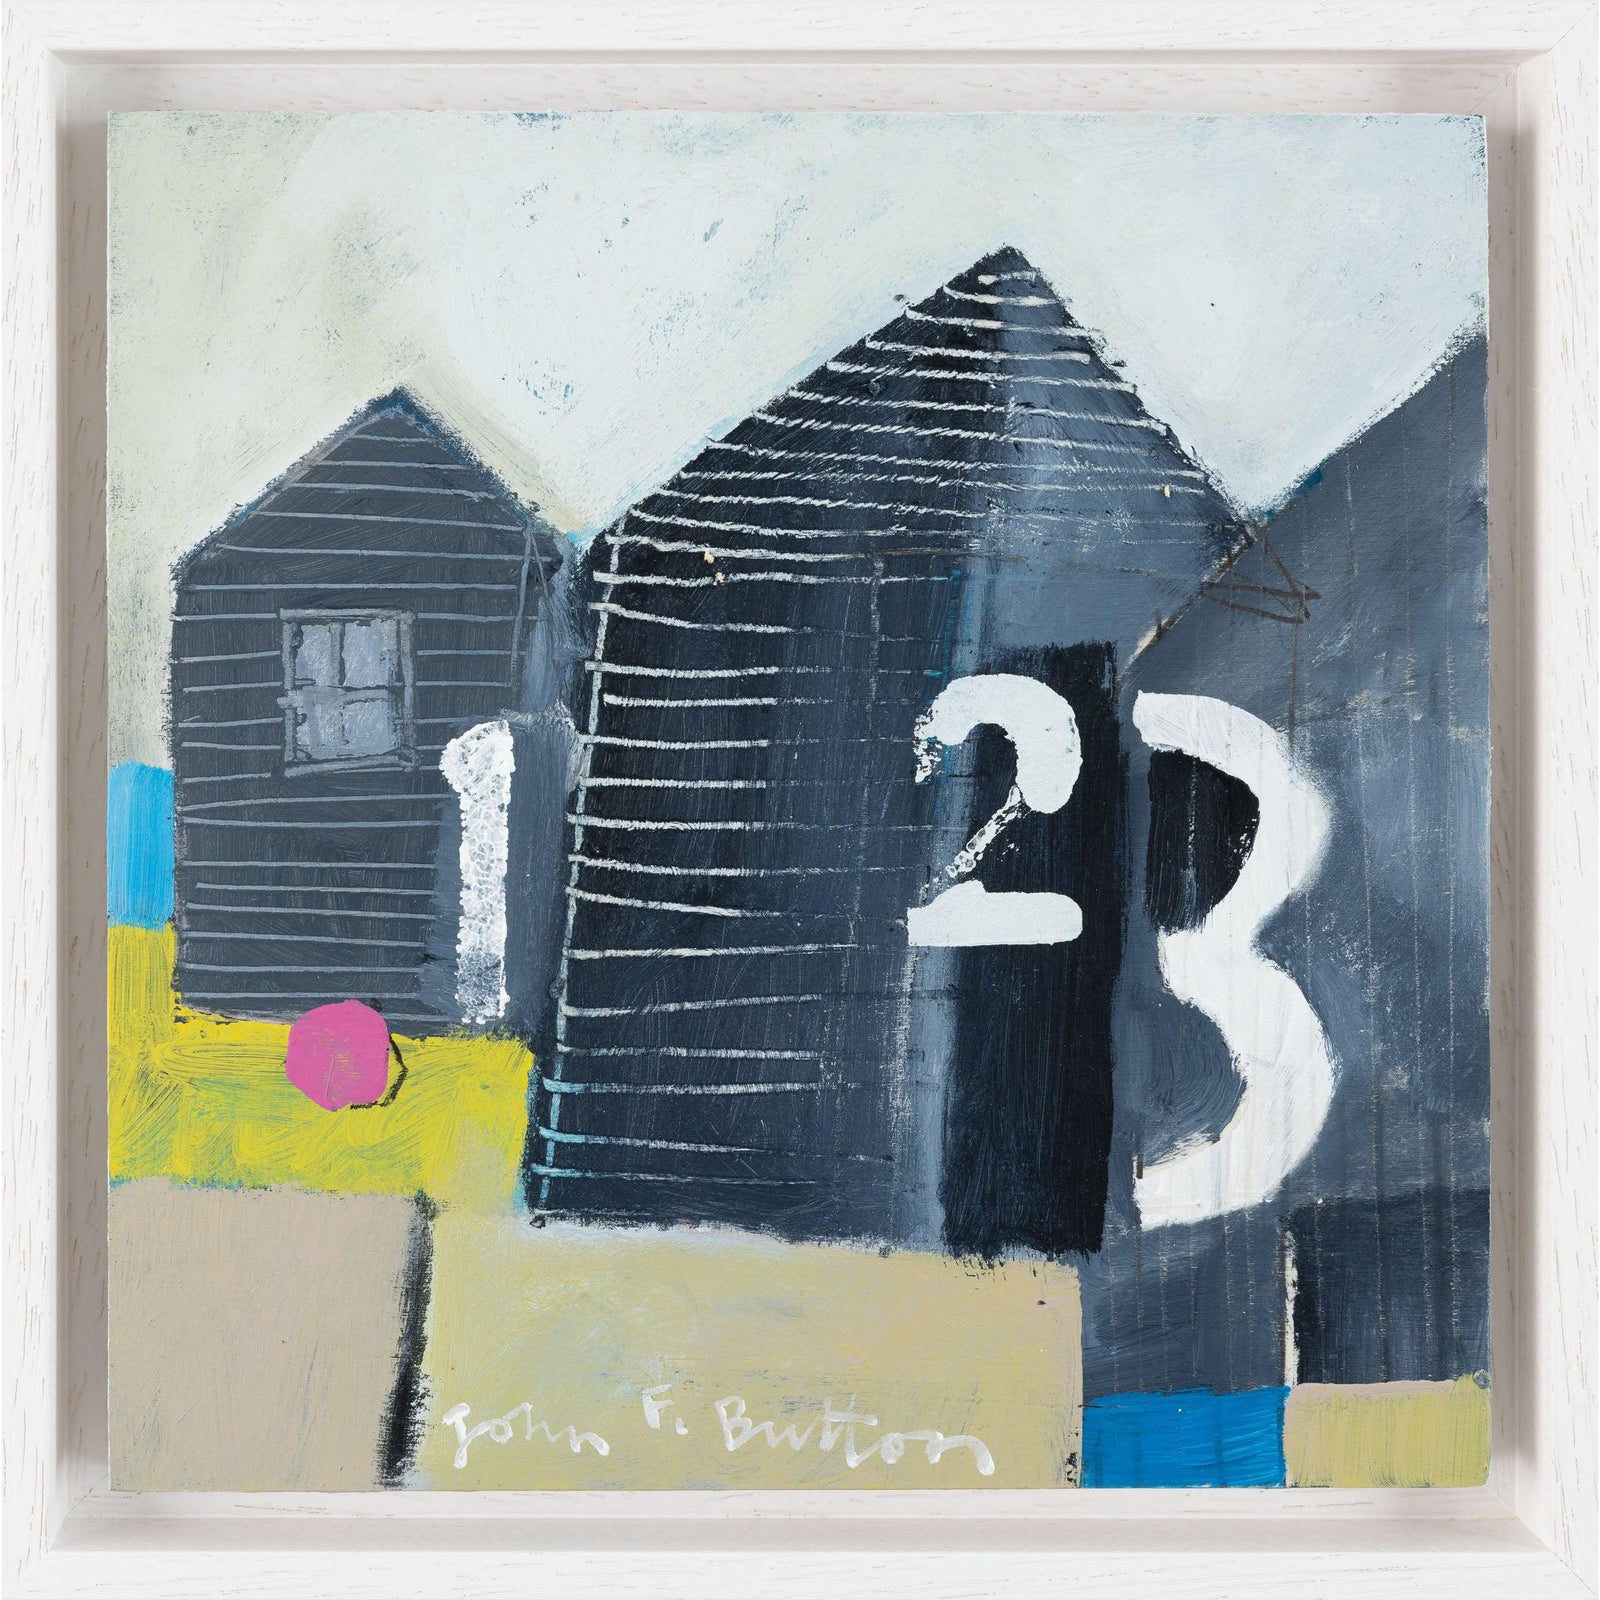 1, 2, 3... by John Button available at Padstow Gallery, Cornwall